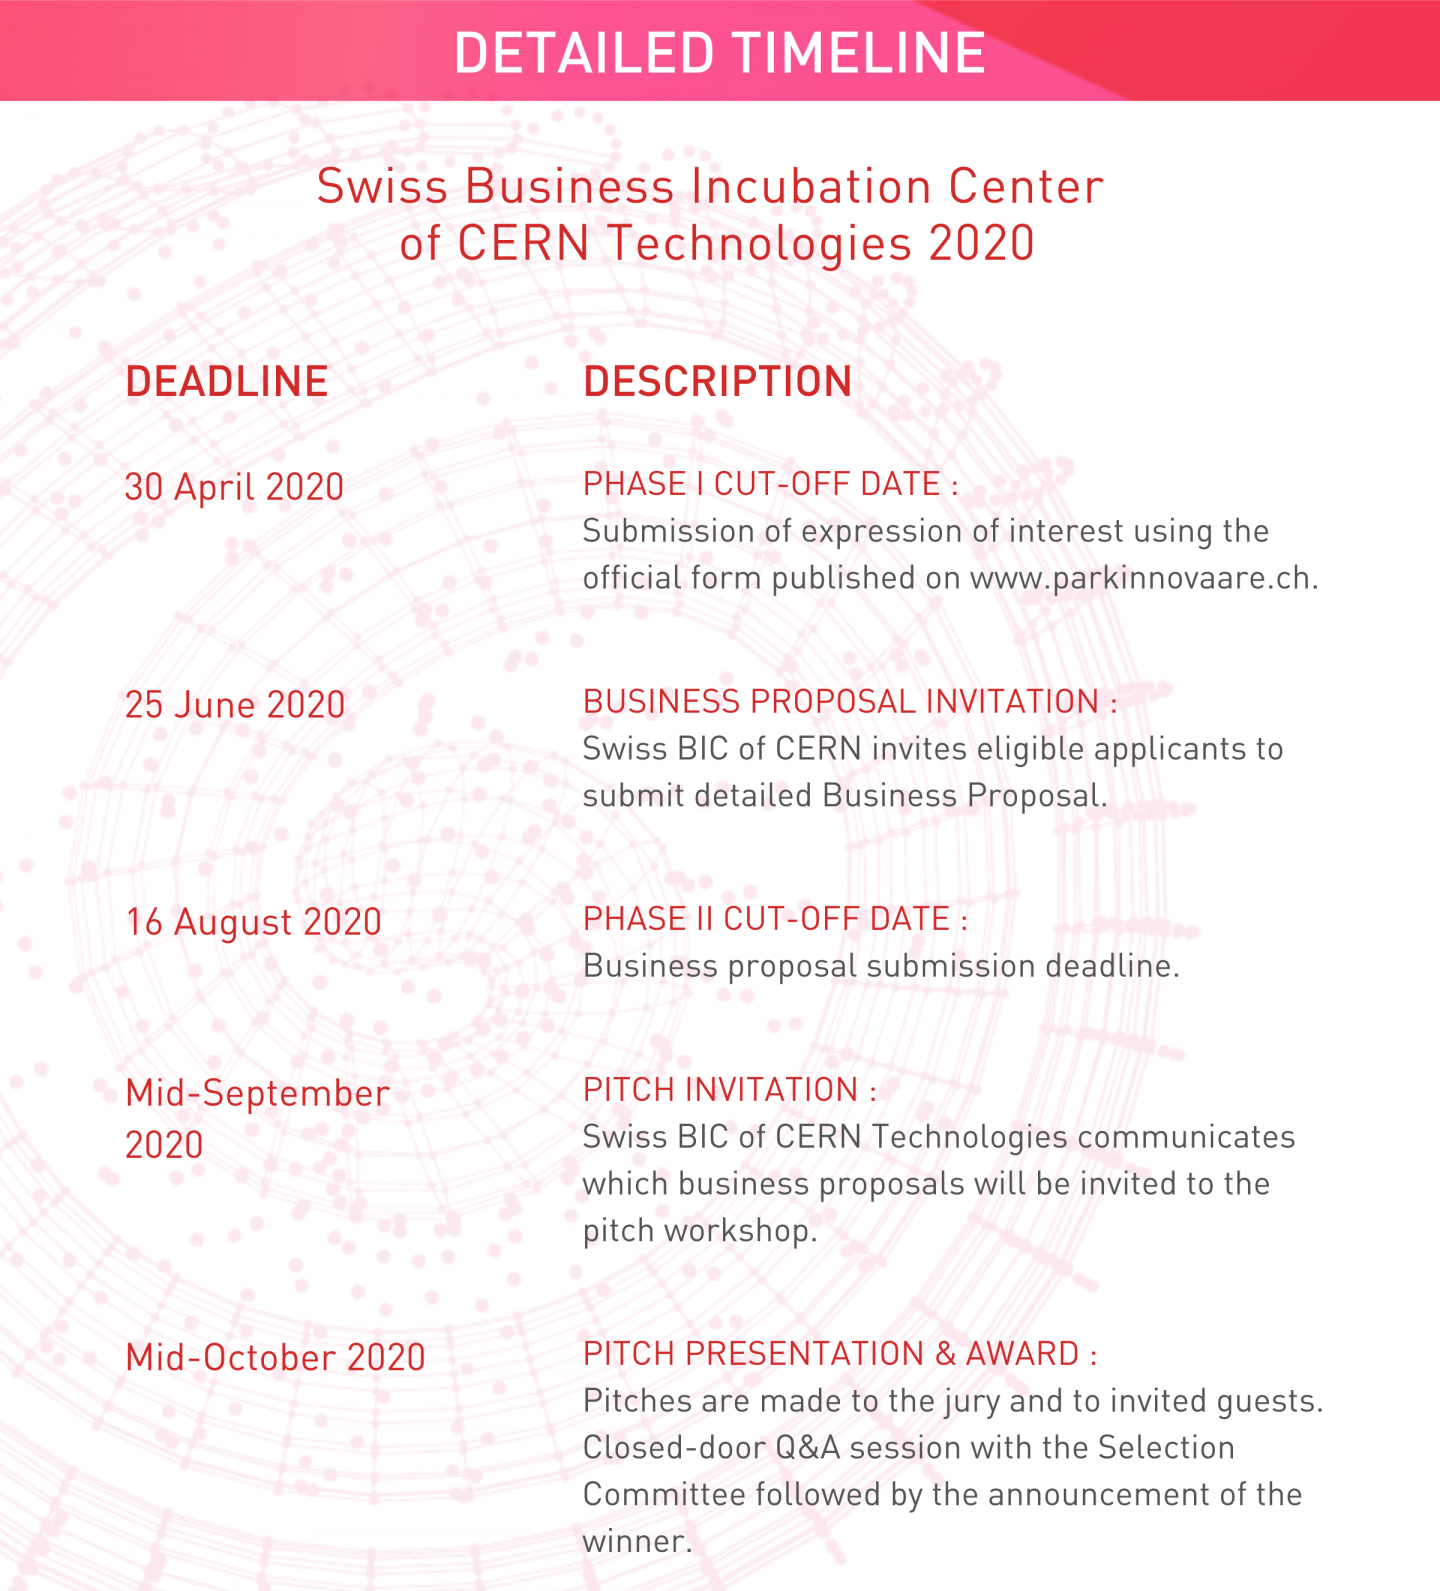 Apply to the Swiss Business Incubation Centre of CERN Technologies at Park Innovaare